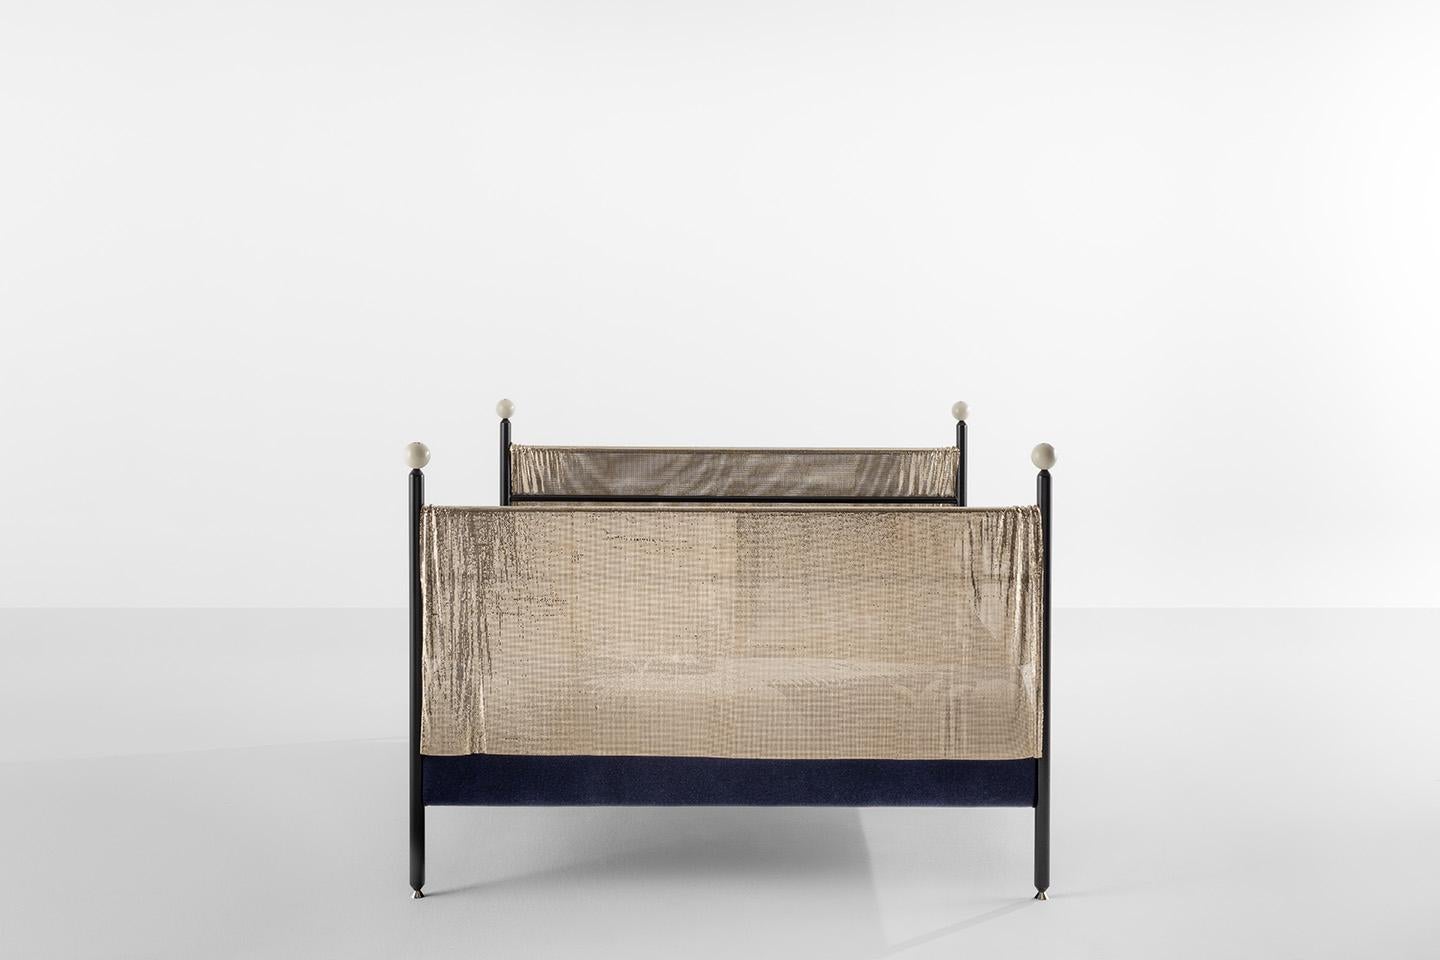 Bed with frame in black matte painted metal, feet in polished steel and spheres in lacquered wood with star decoration. Bed frame upholstered in Mohair Deep Blue fabric. Golden metallic mesh decoration.
Progetto Non Finito collection.